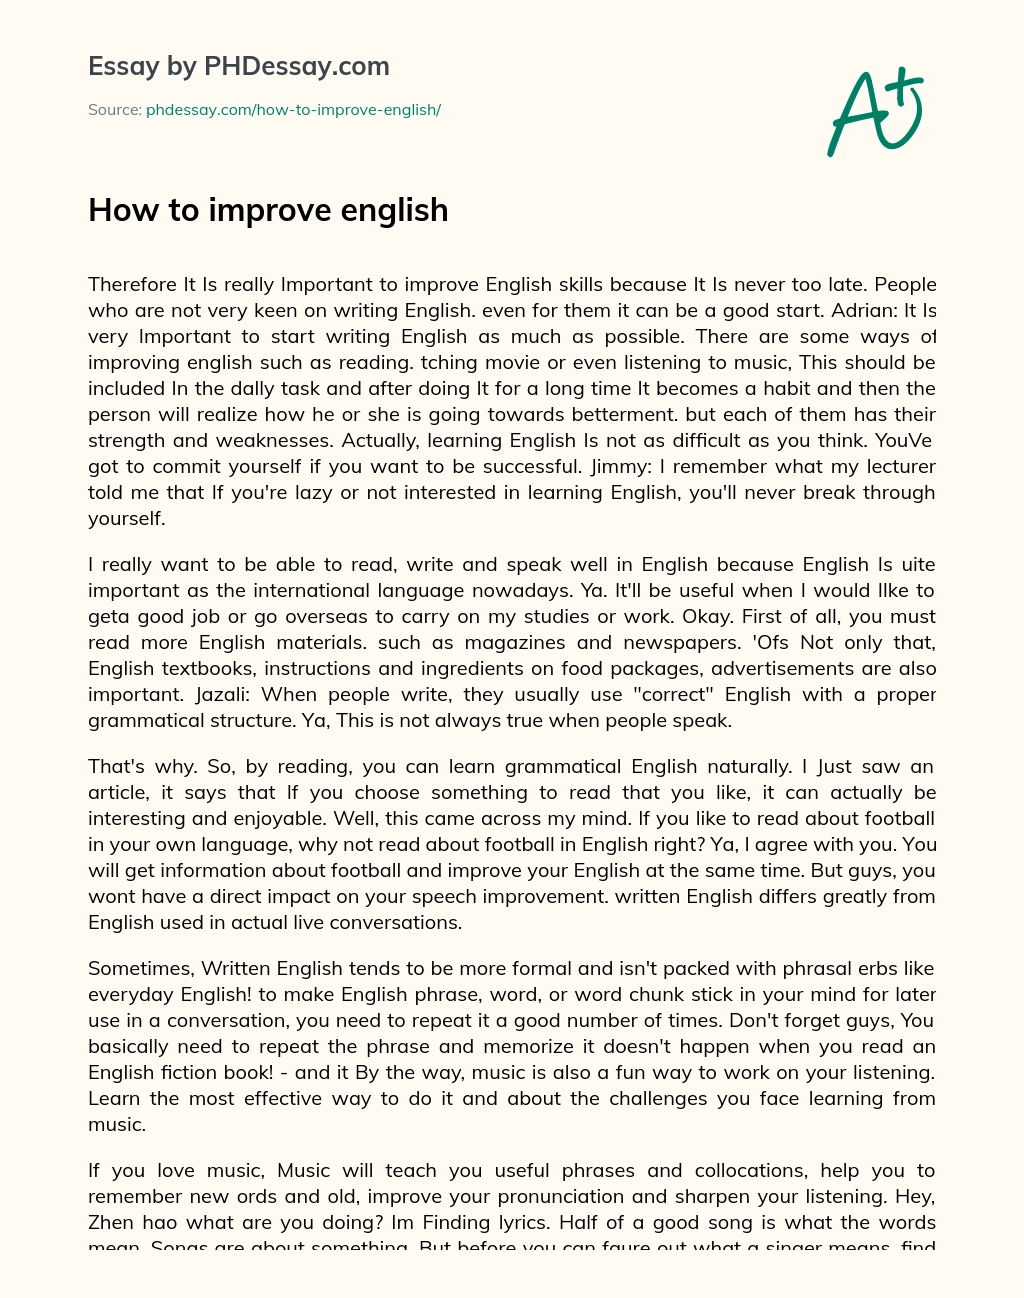 essay writing how to improve your english